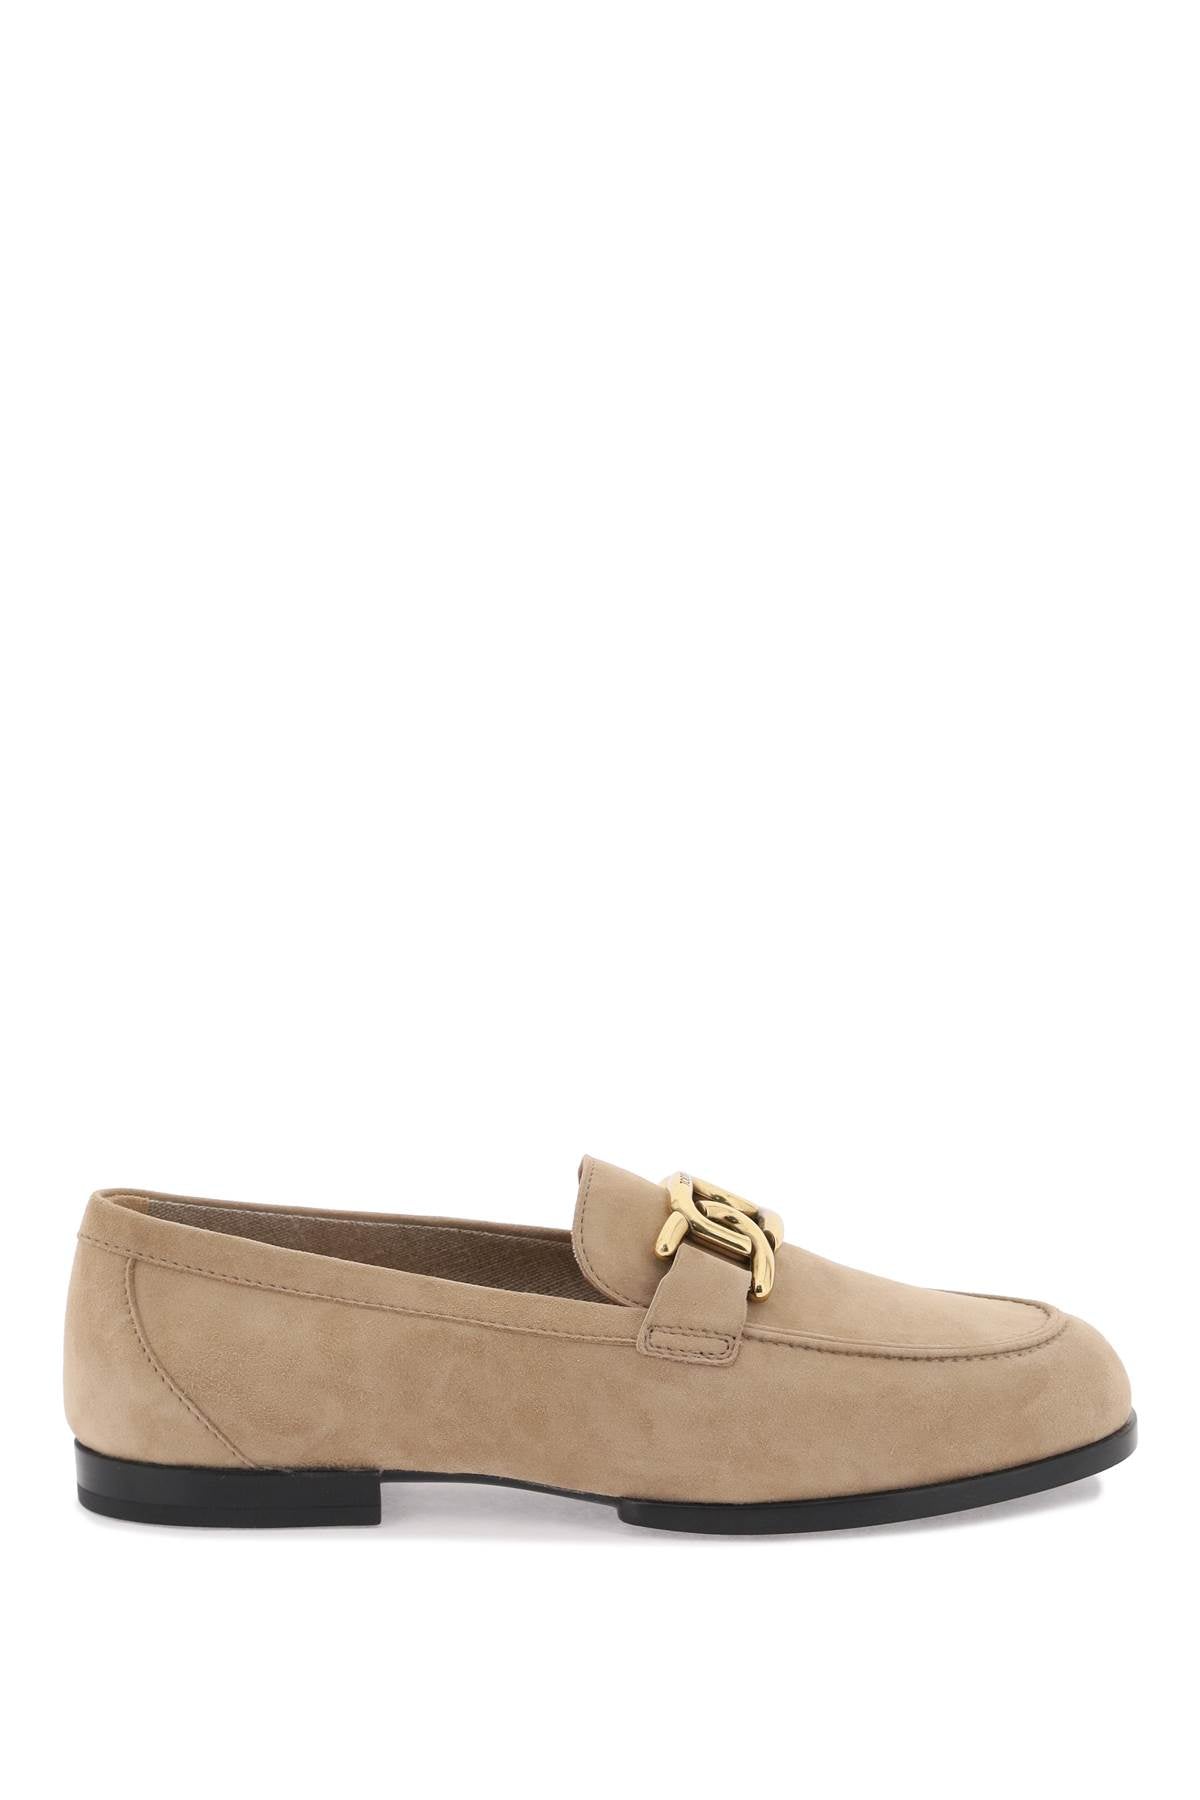 Tod's suede leather kate loafers in-women > shoes > loafers-Tod'S-Urbanheer